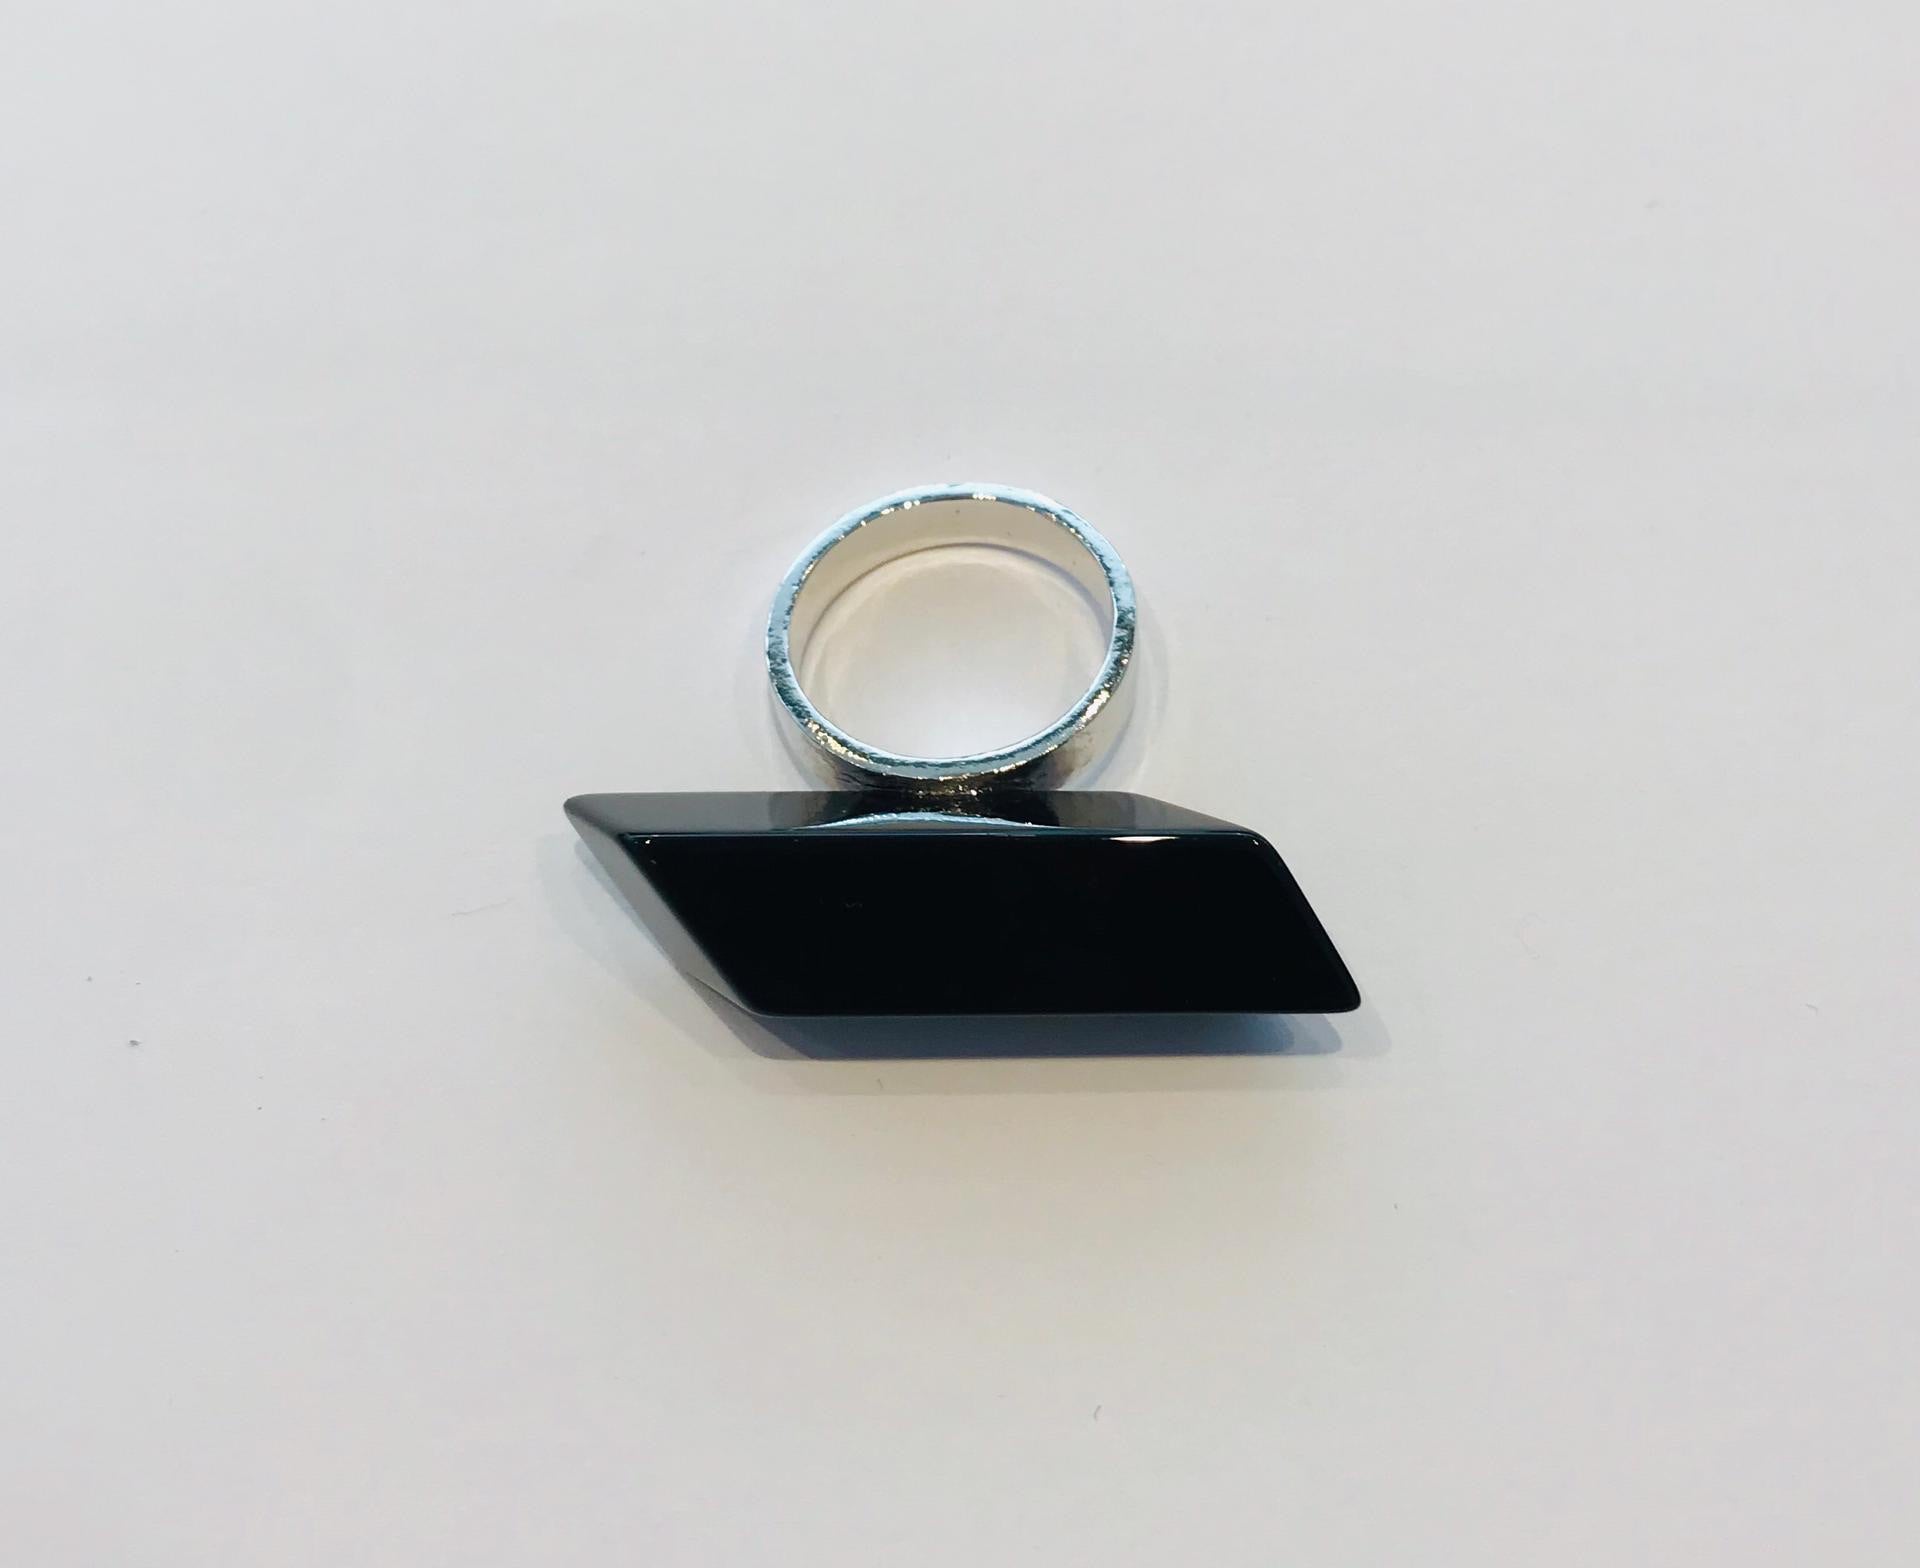 Wouters & Hendrix - silver statement ring with black onyx stone